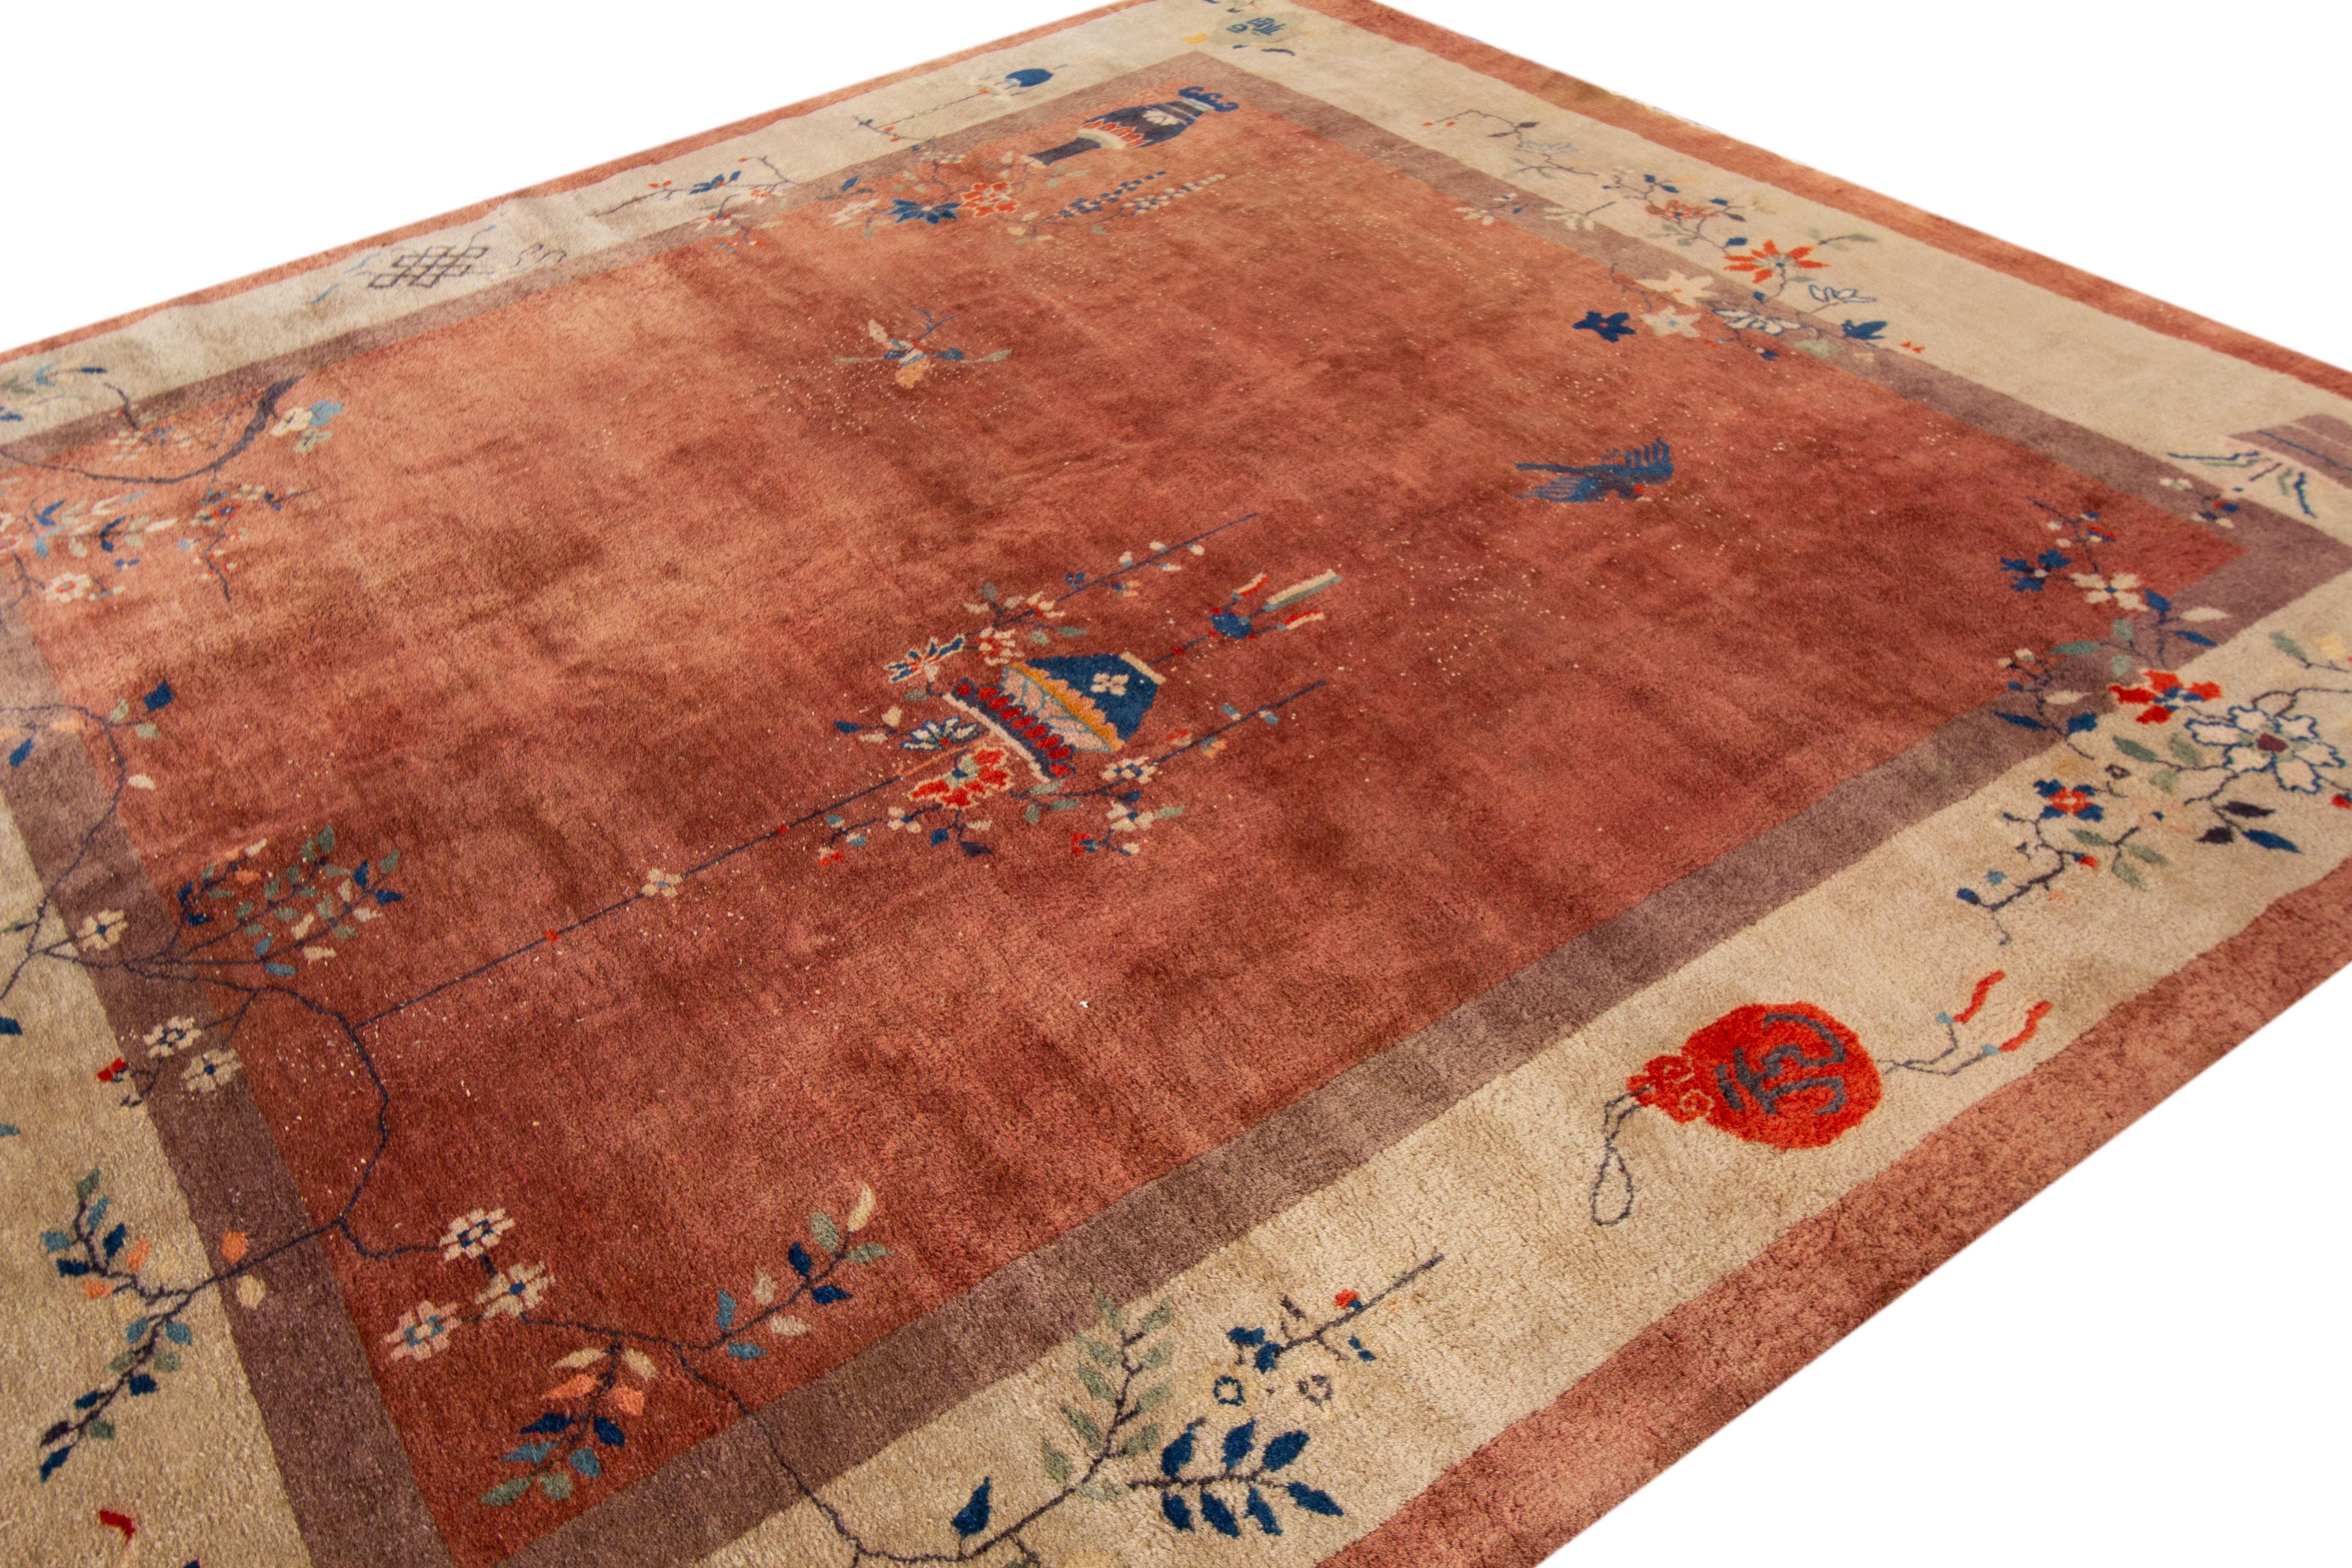 A hand-knotted antique Chinese rug with a floral Art Deco design. This rug measures 9'10